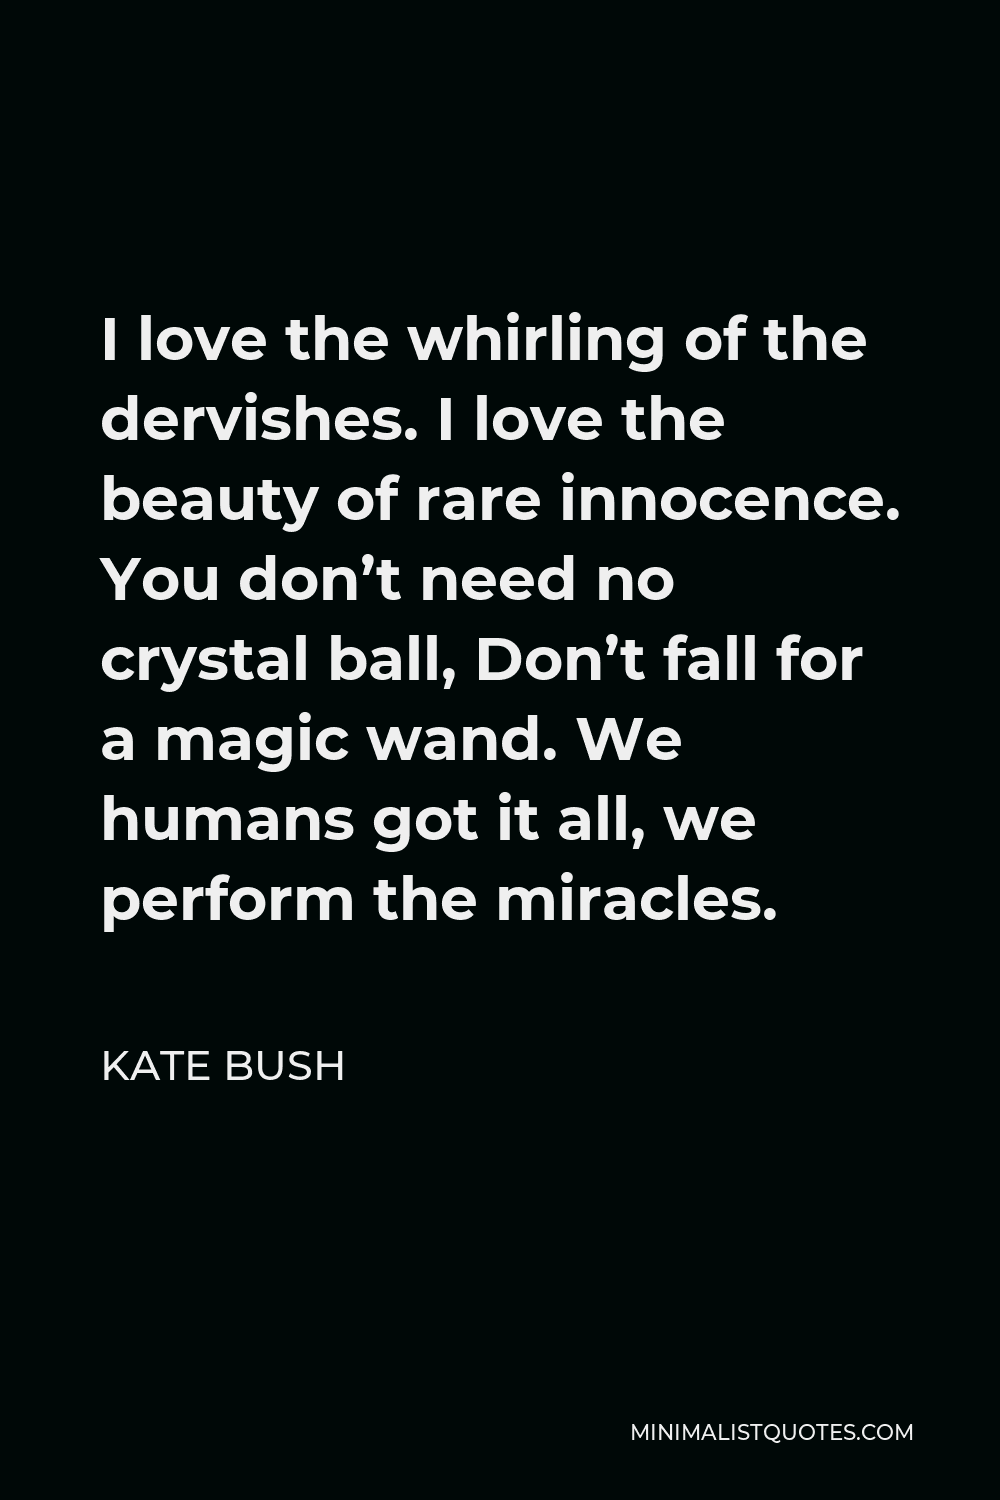 Kate Bush Quote - I love the whirling of the dervishes. I love the beauty of rare innocence. You don’t need no crystal ball, Don’t fall for a magic wand. We humans got it all, we perform the miracles.